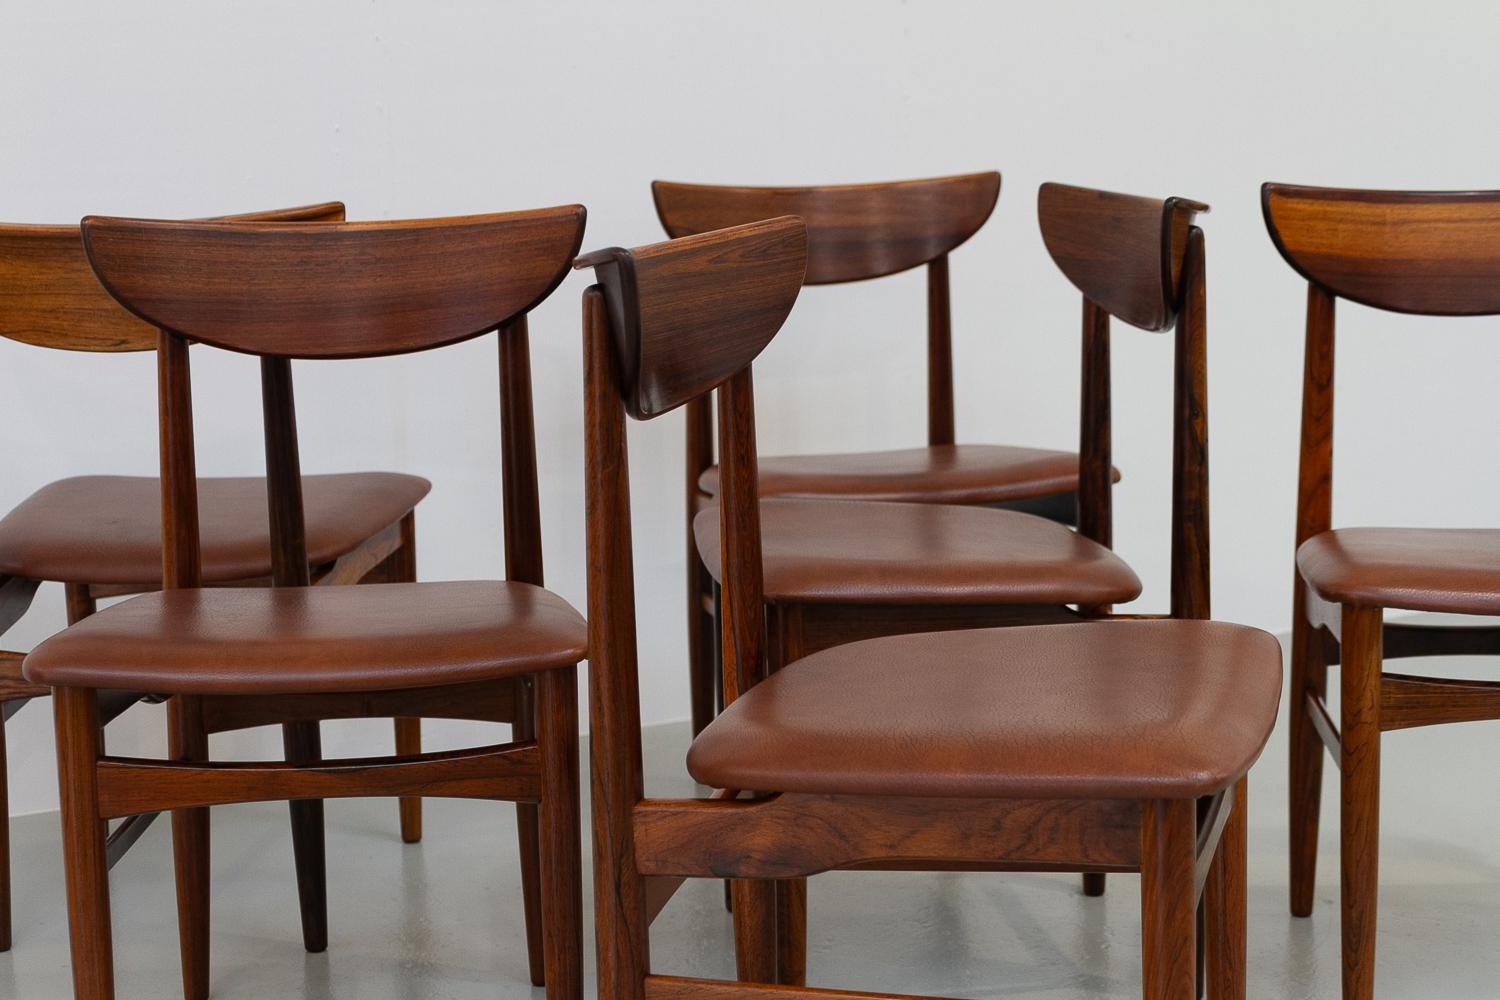 Vintage Danish Rosewood Dining Chairs by E.W. Bach for Skovby, 1960s. Set of 6. For Sale 13